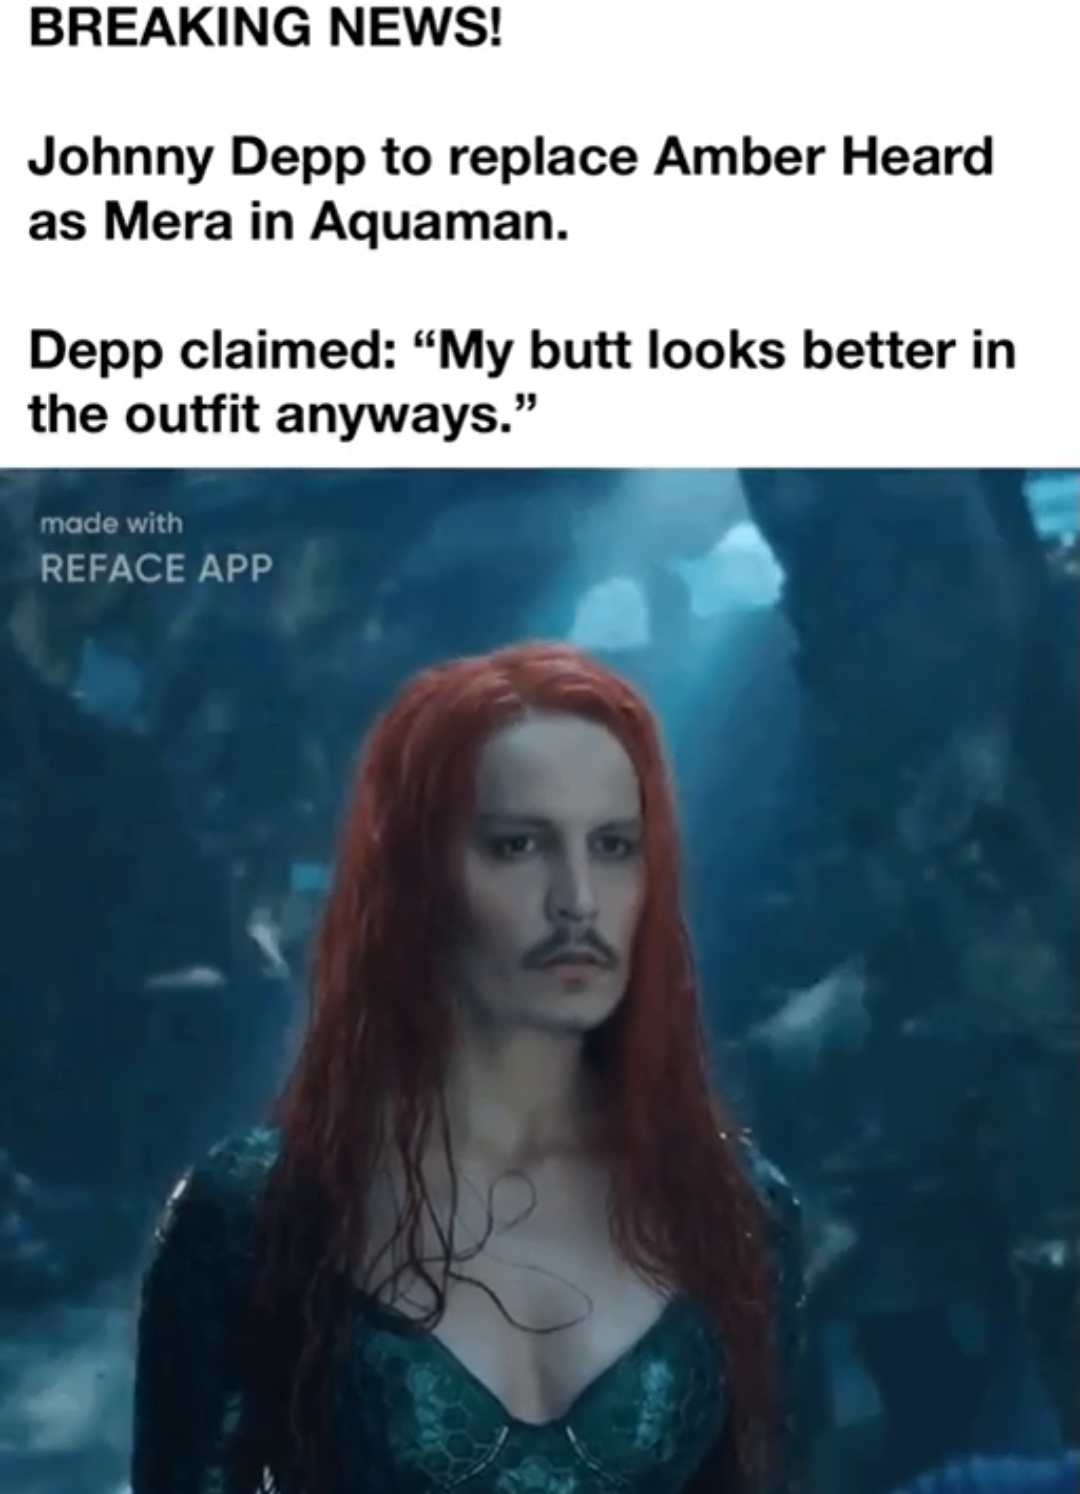 raoul thomas moat - Breaking News! Johnny Depp to replace Amber Heard as Mera in Aquaman. Depp claimed "My butt looks better in the outfit anyways." made with Reface App